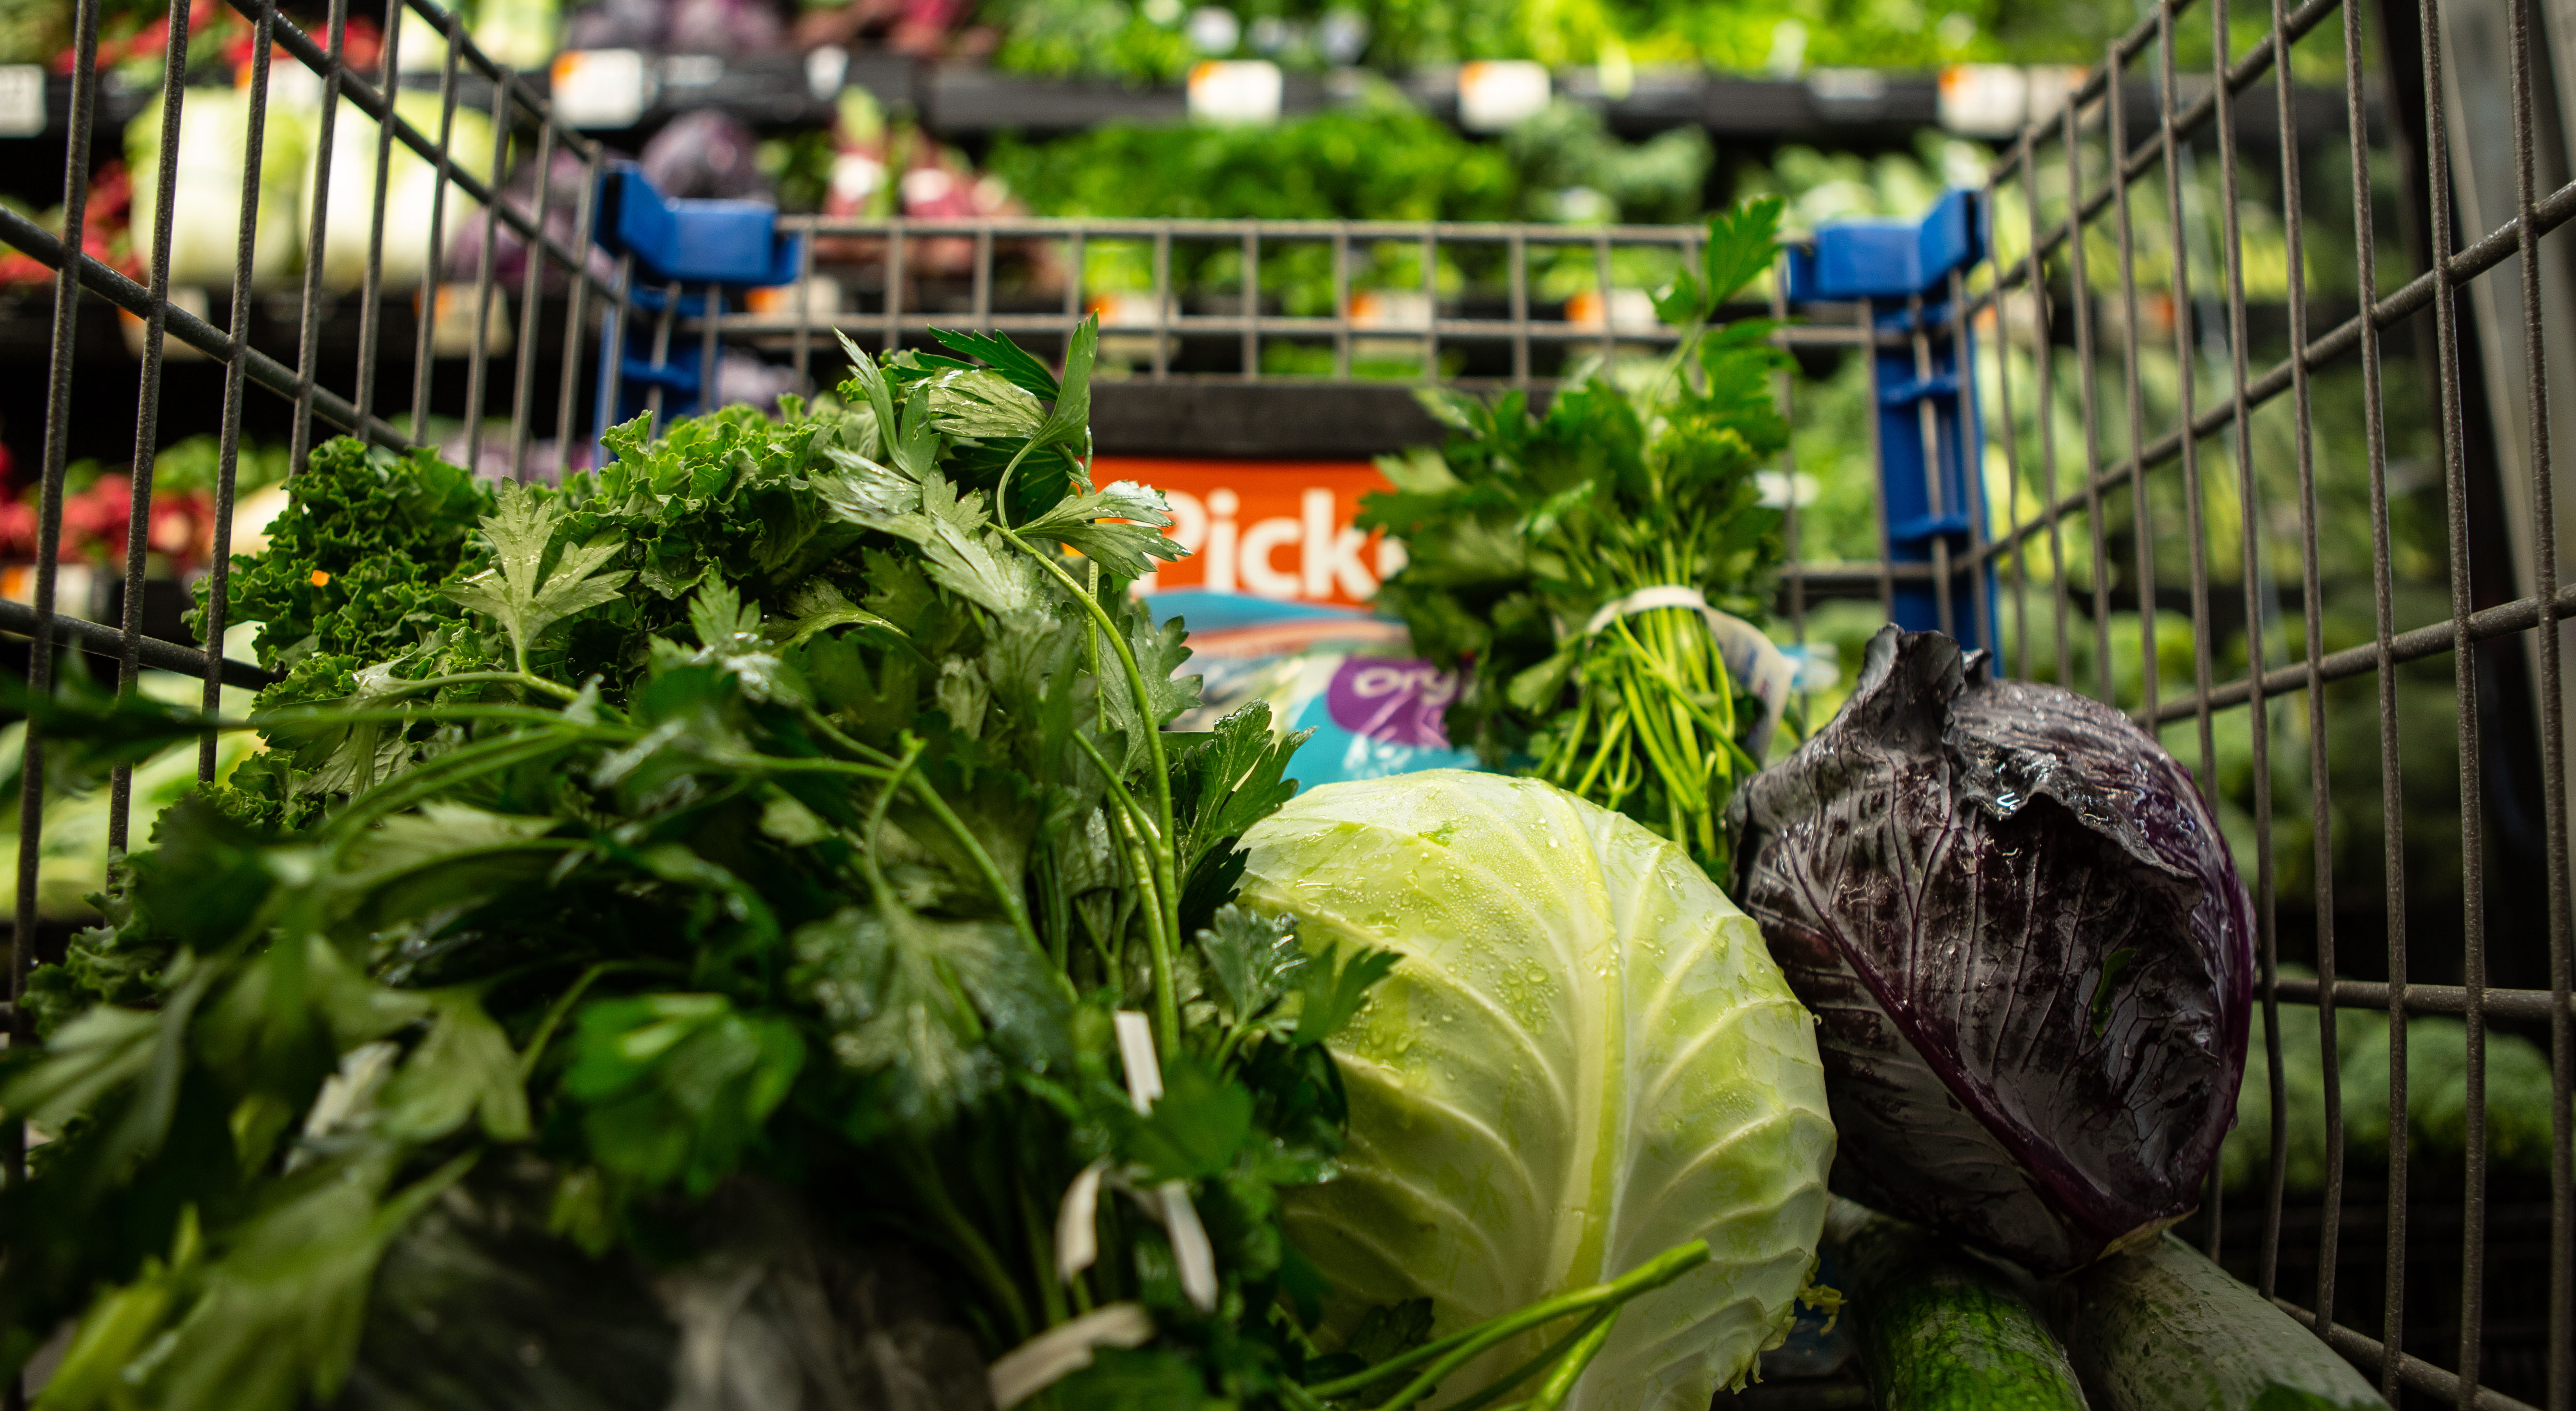 Lettuce and fresh produce in a shopping cart